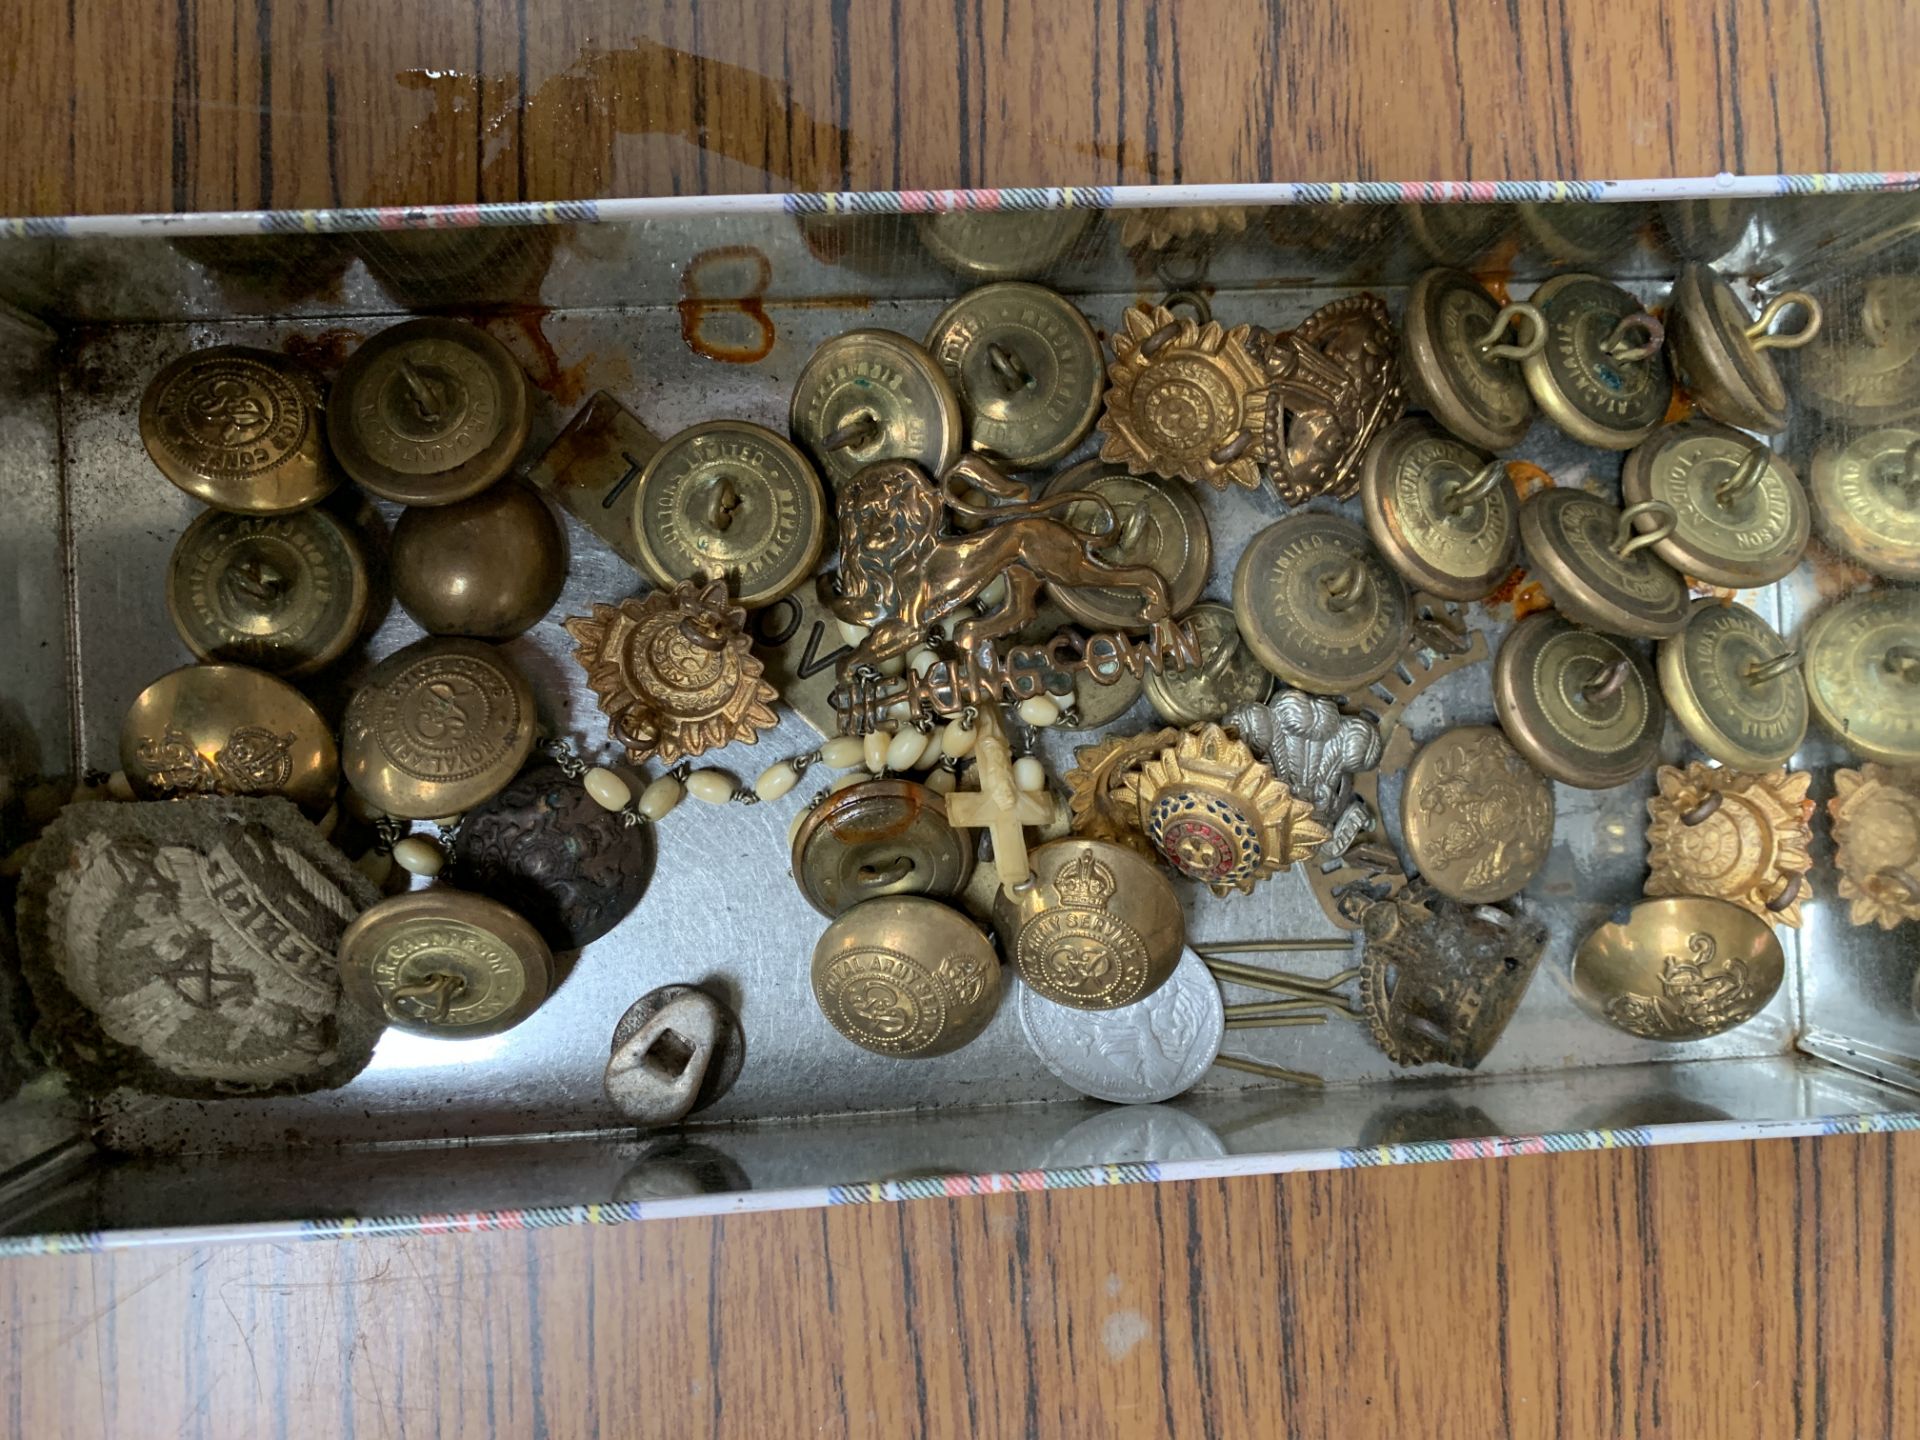 A collection of brass military buttons and badges